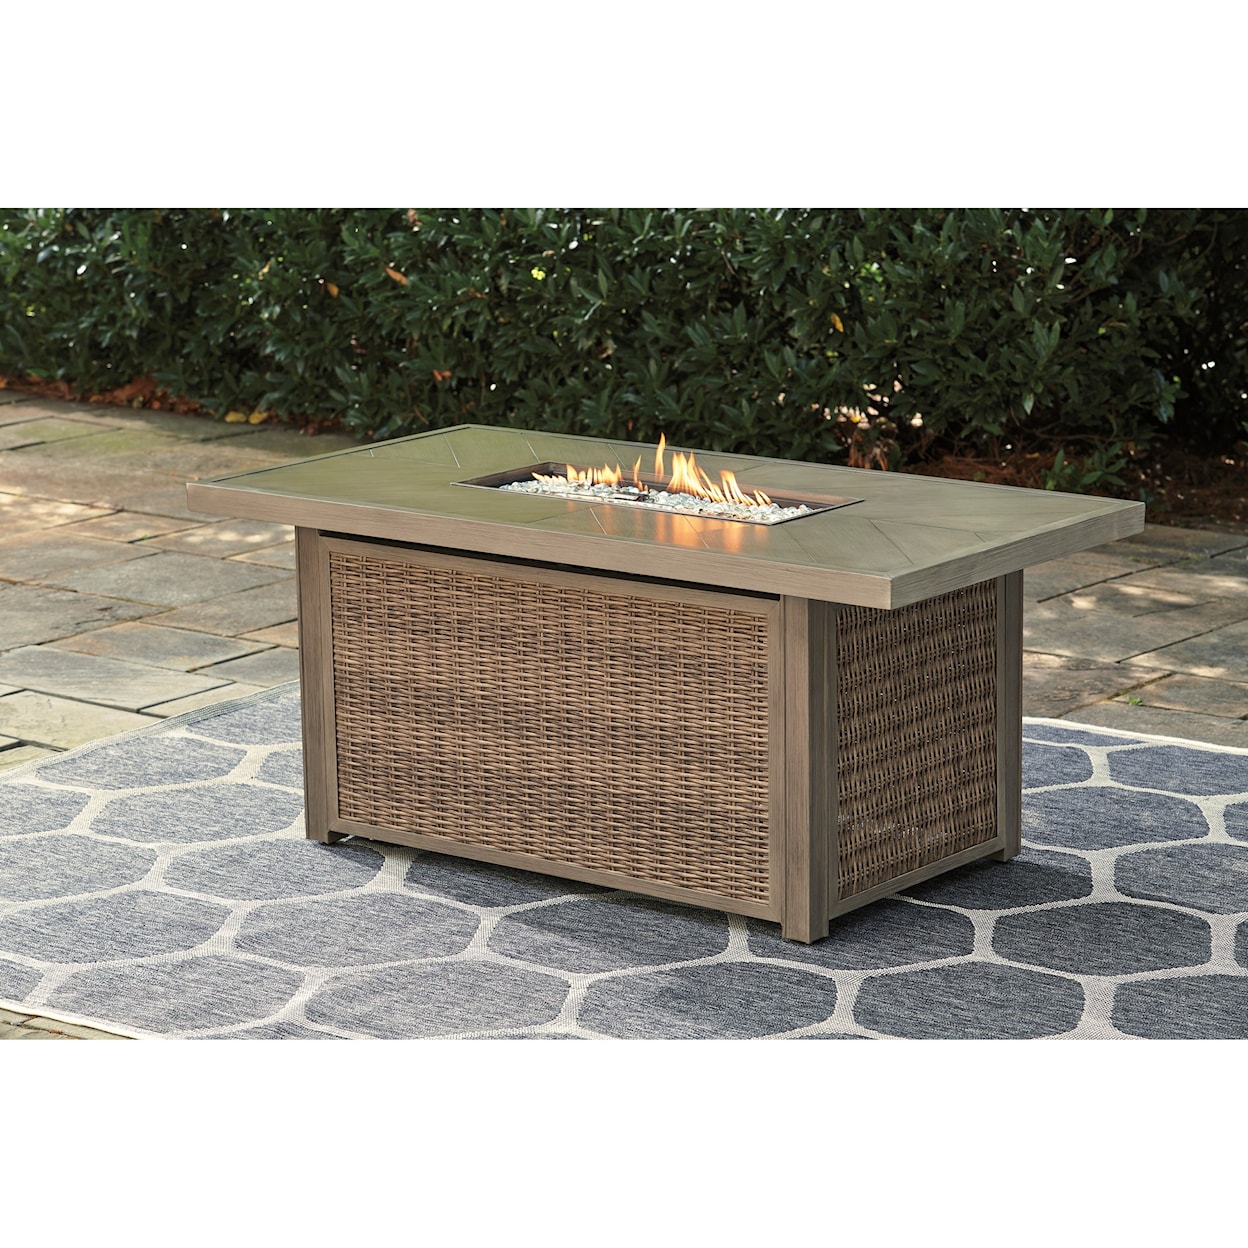 Signature Design by Ashley Beachcroft Rectangular Fire Pit Table